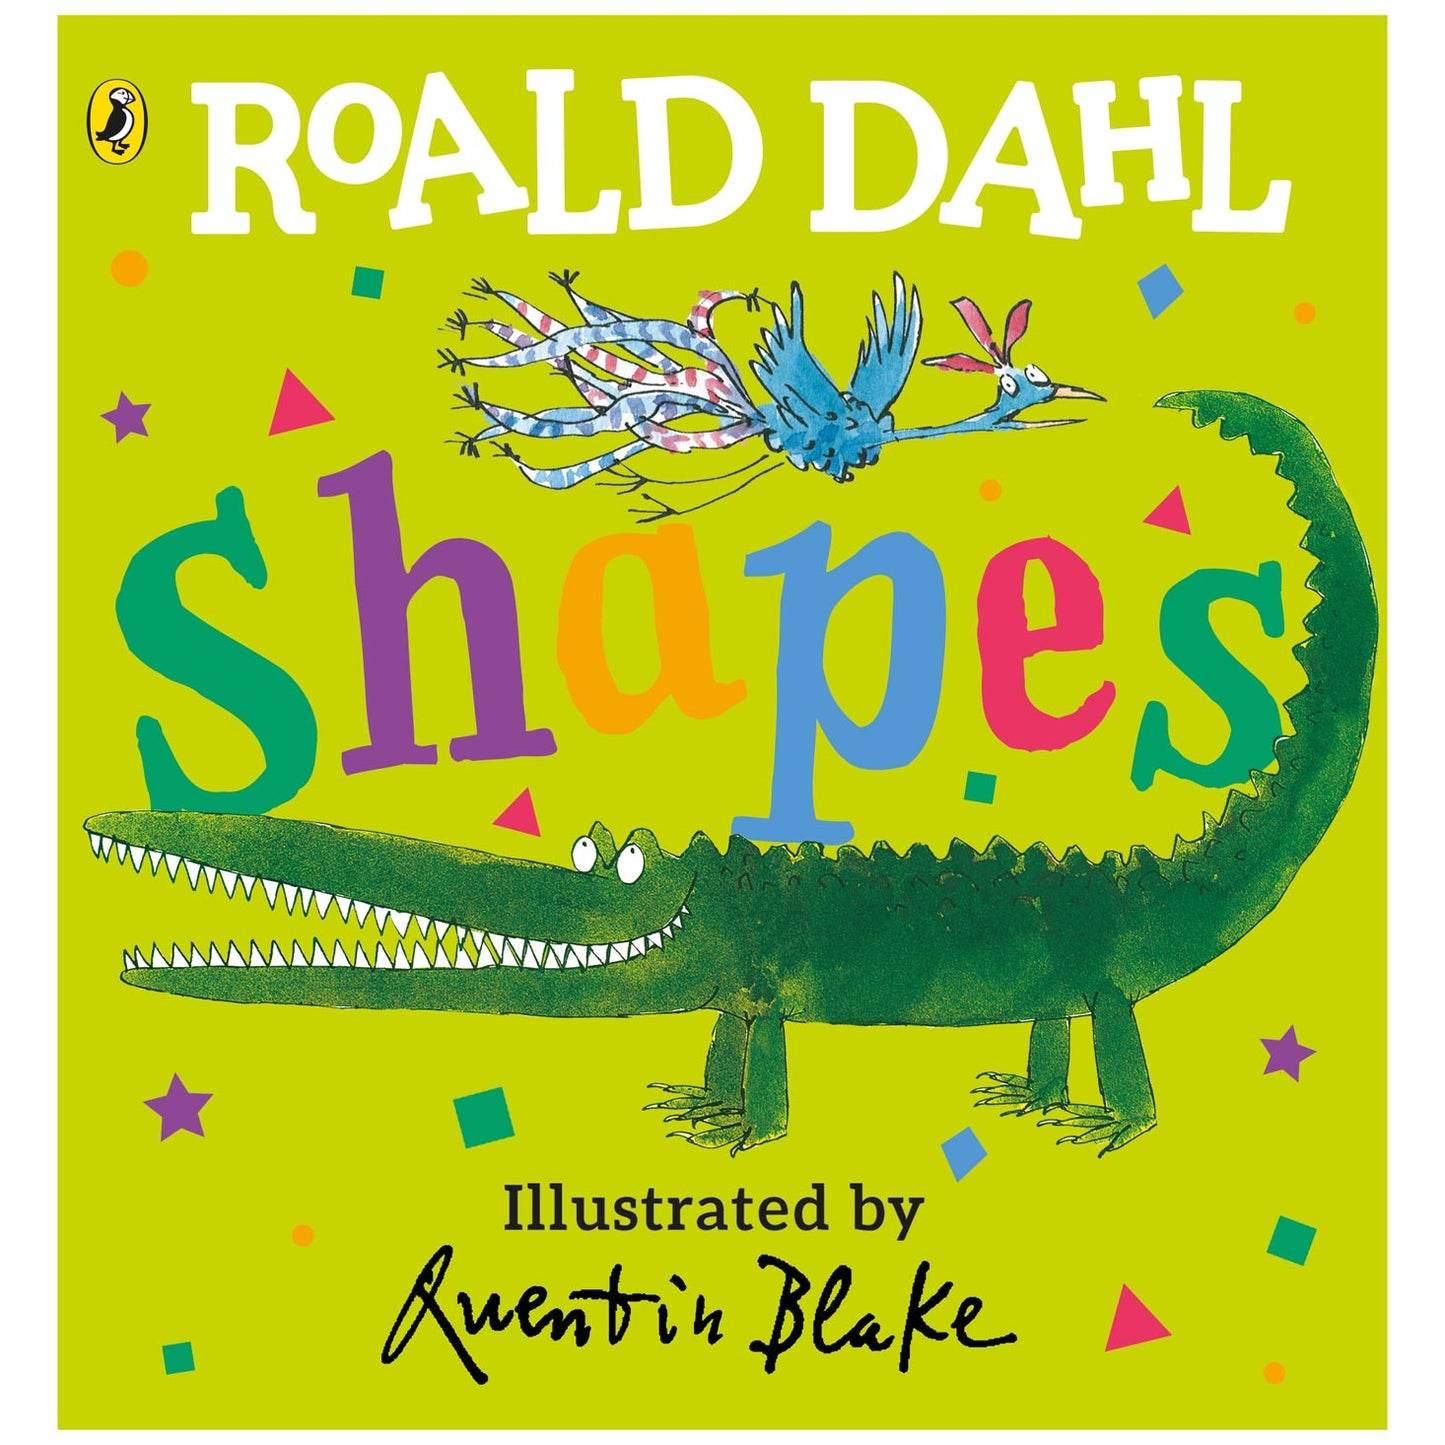 Roald Dahl's Shapes, a board book for toddlers